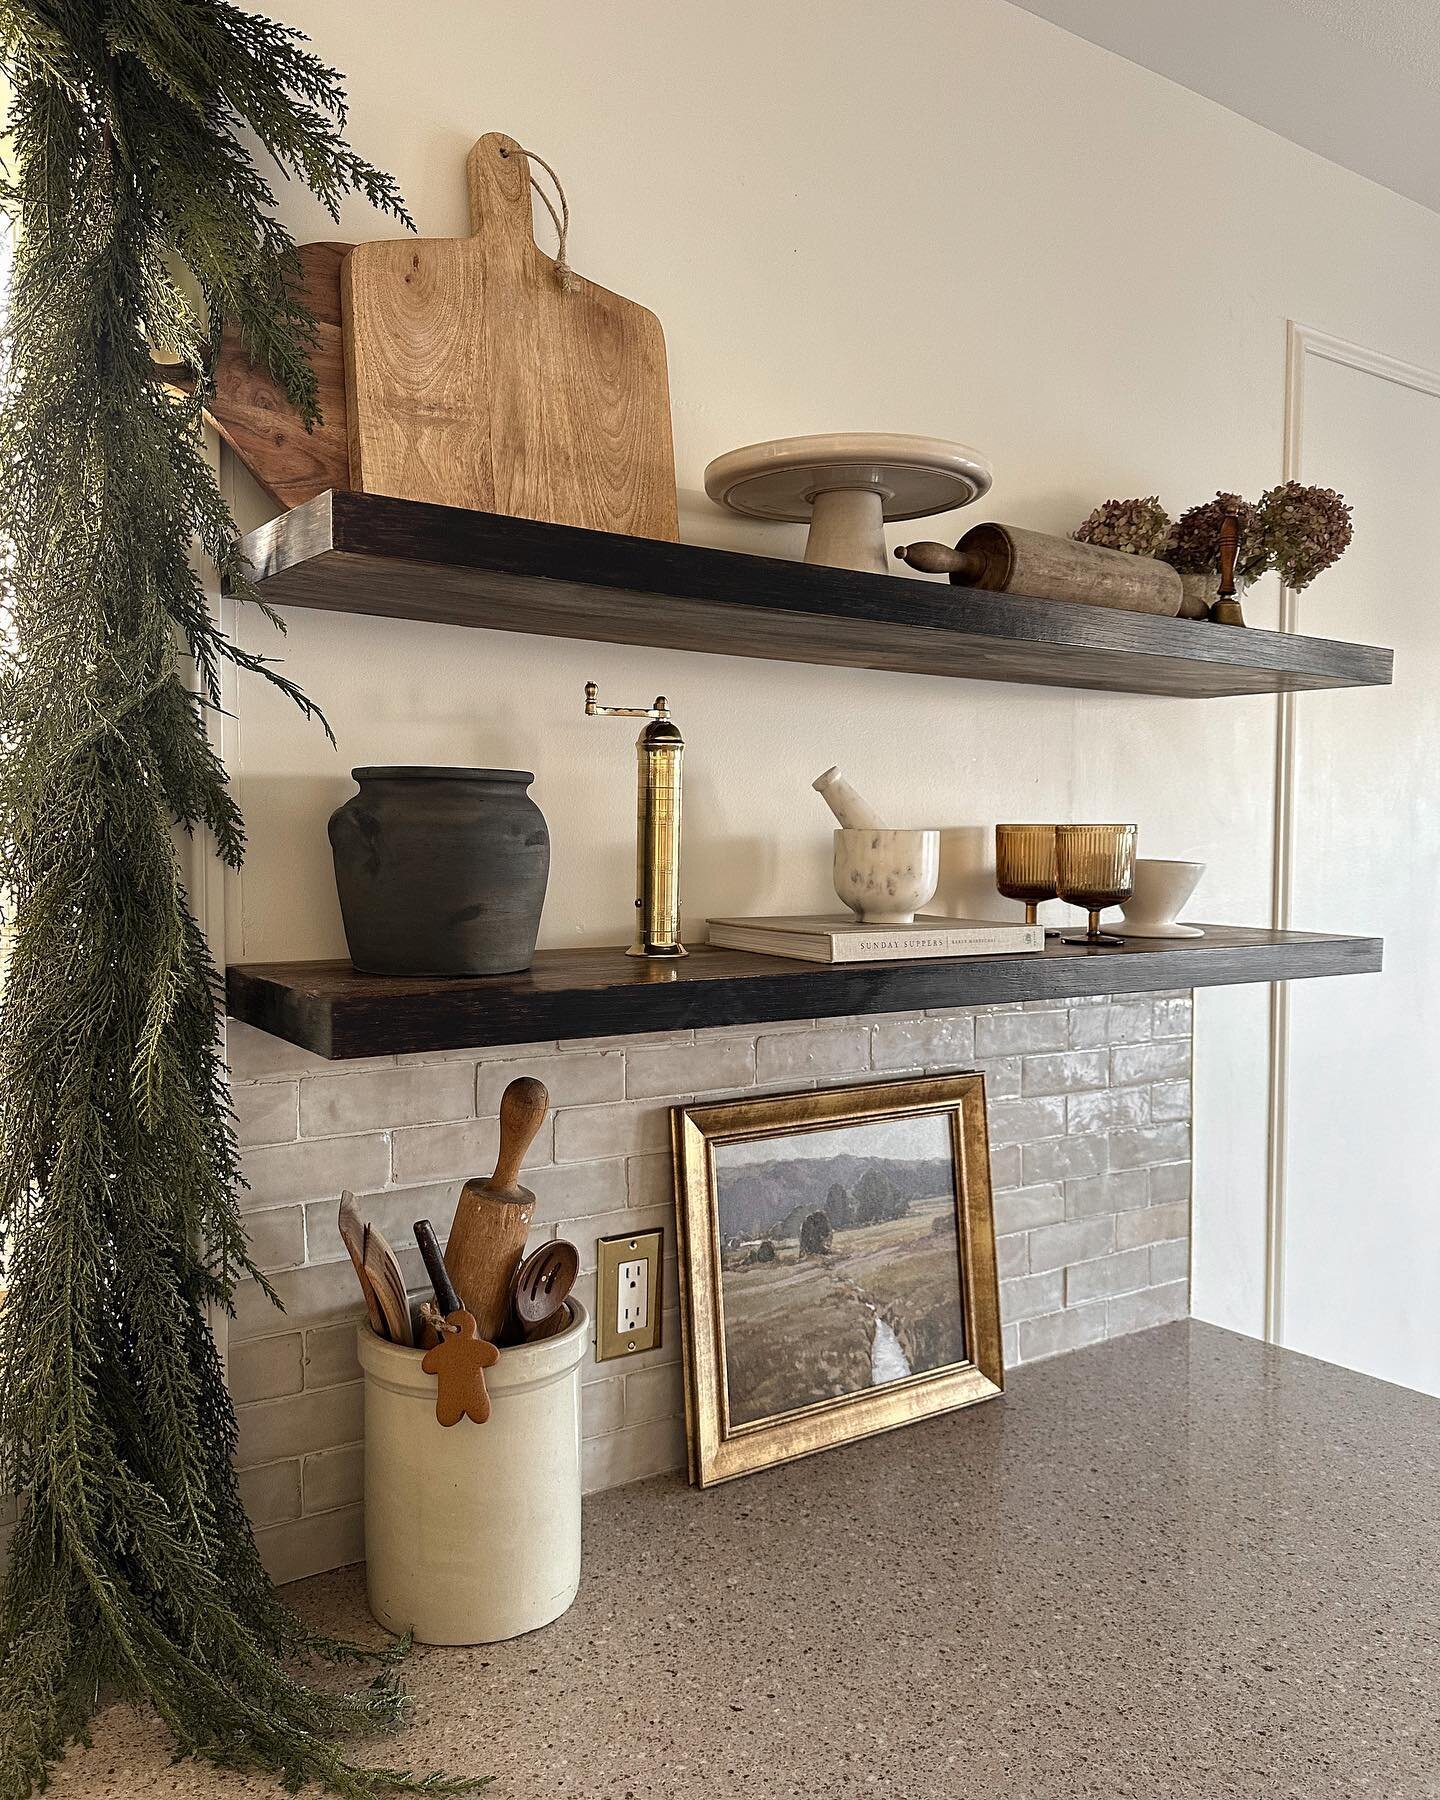 Moody little kitchen details on this winter day🌲